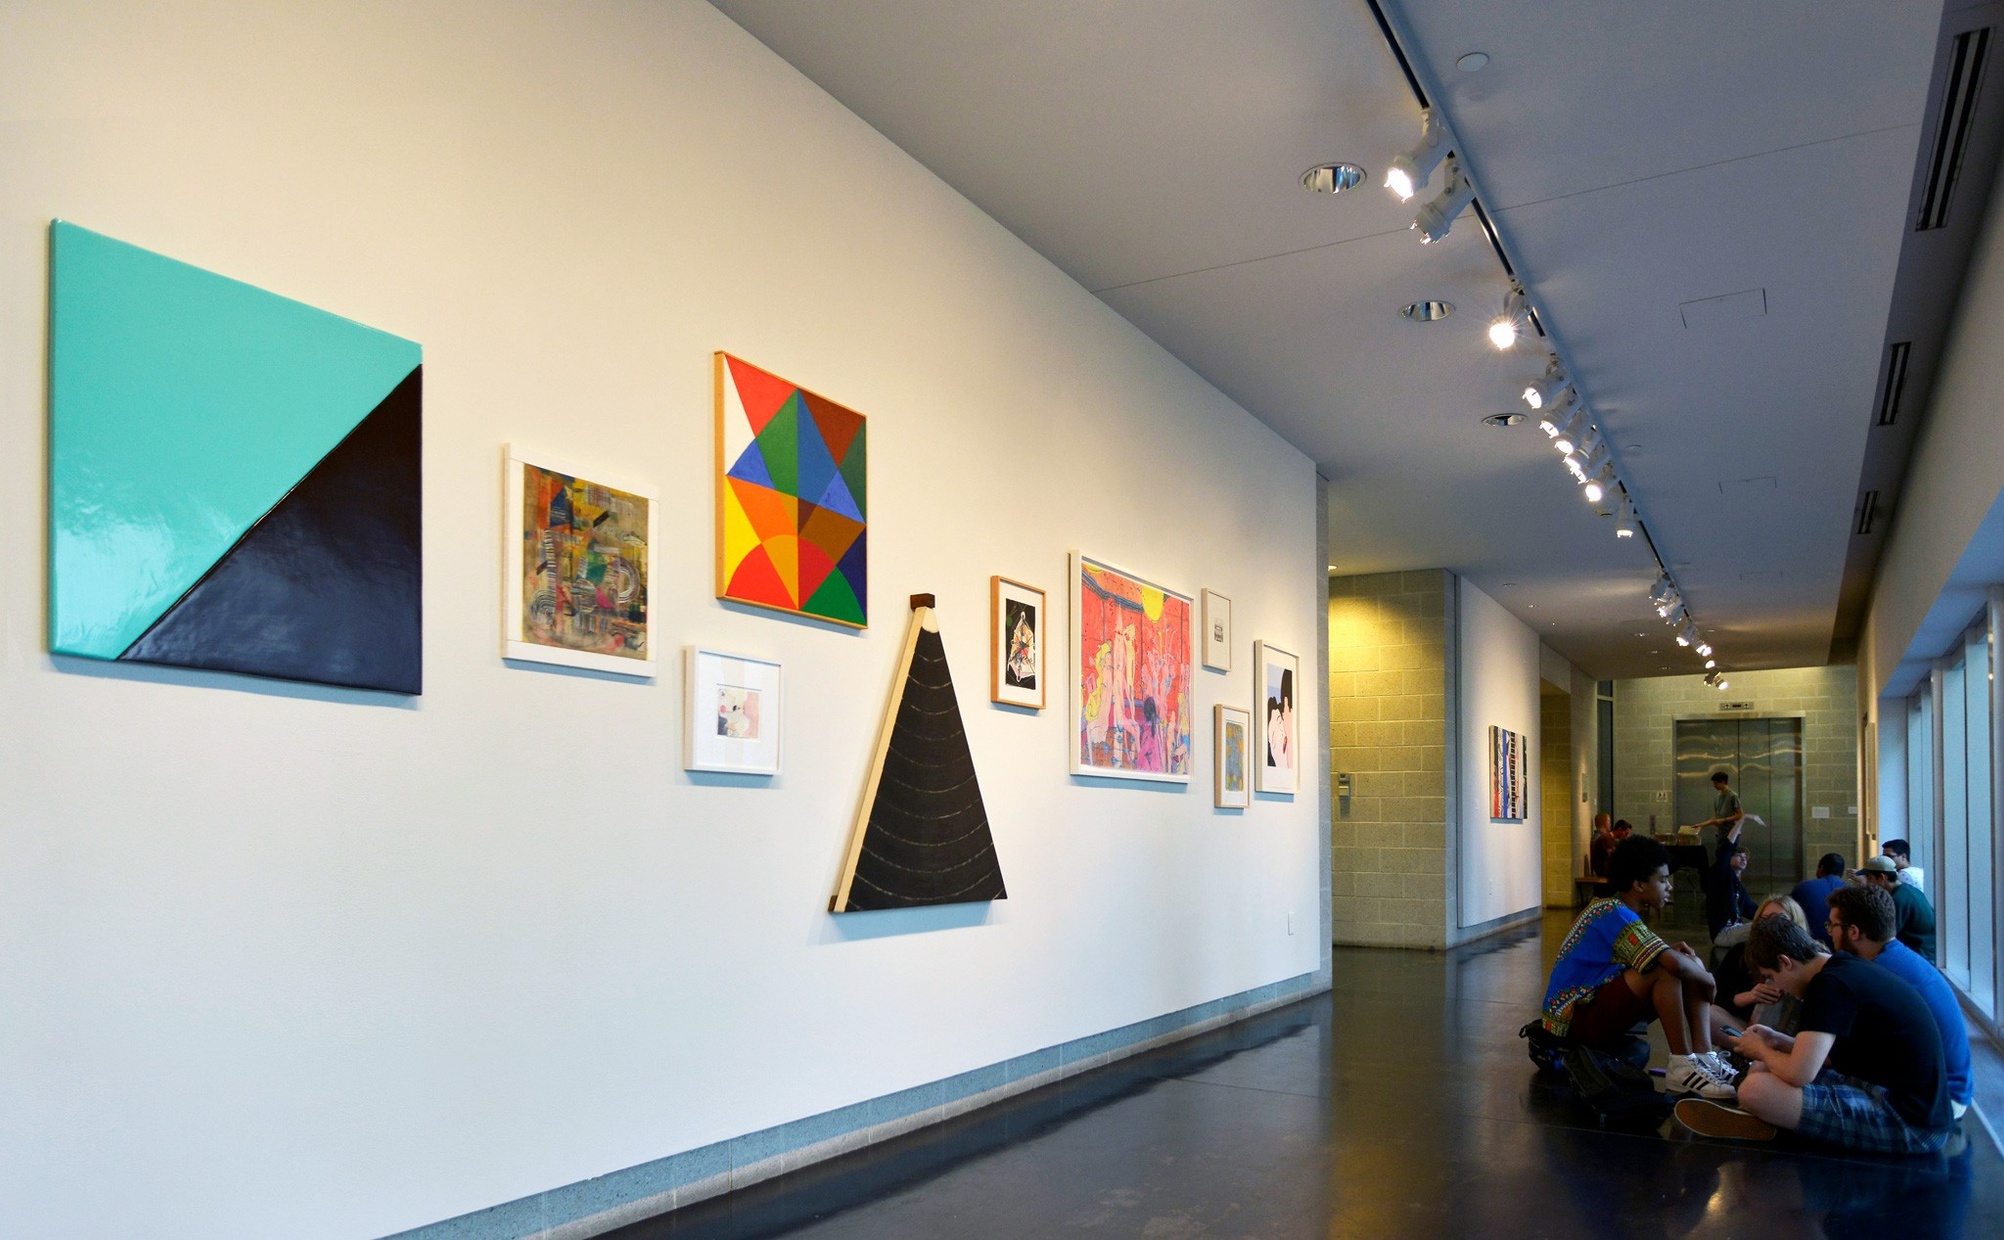 Colorful, abstract artworks hang on a white wall in a hallway. A group of young people sit on the floor opposite the wall of artwork.